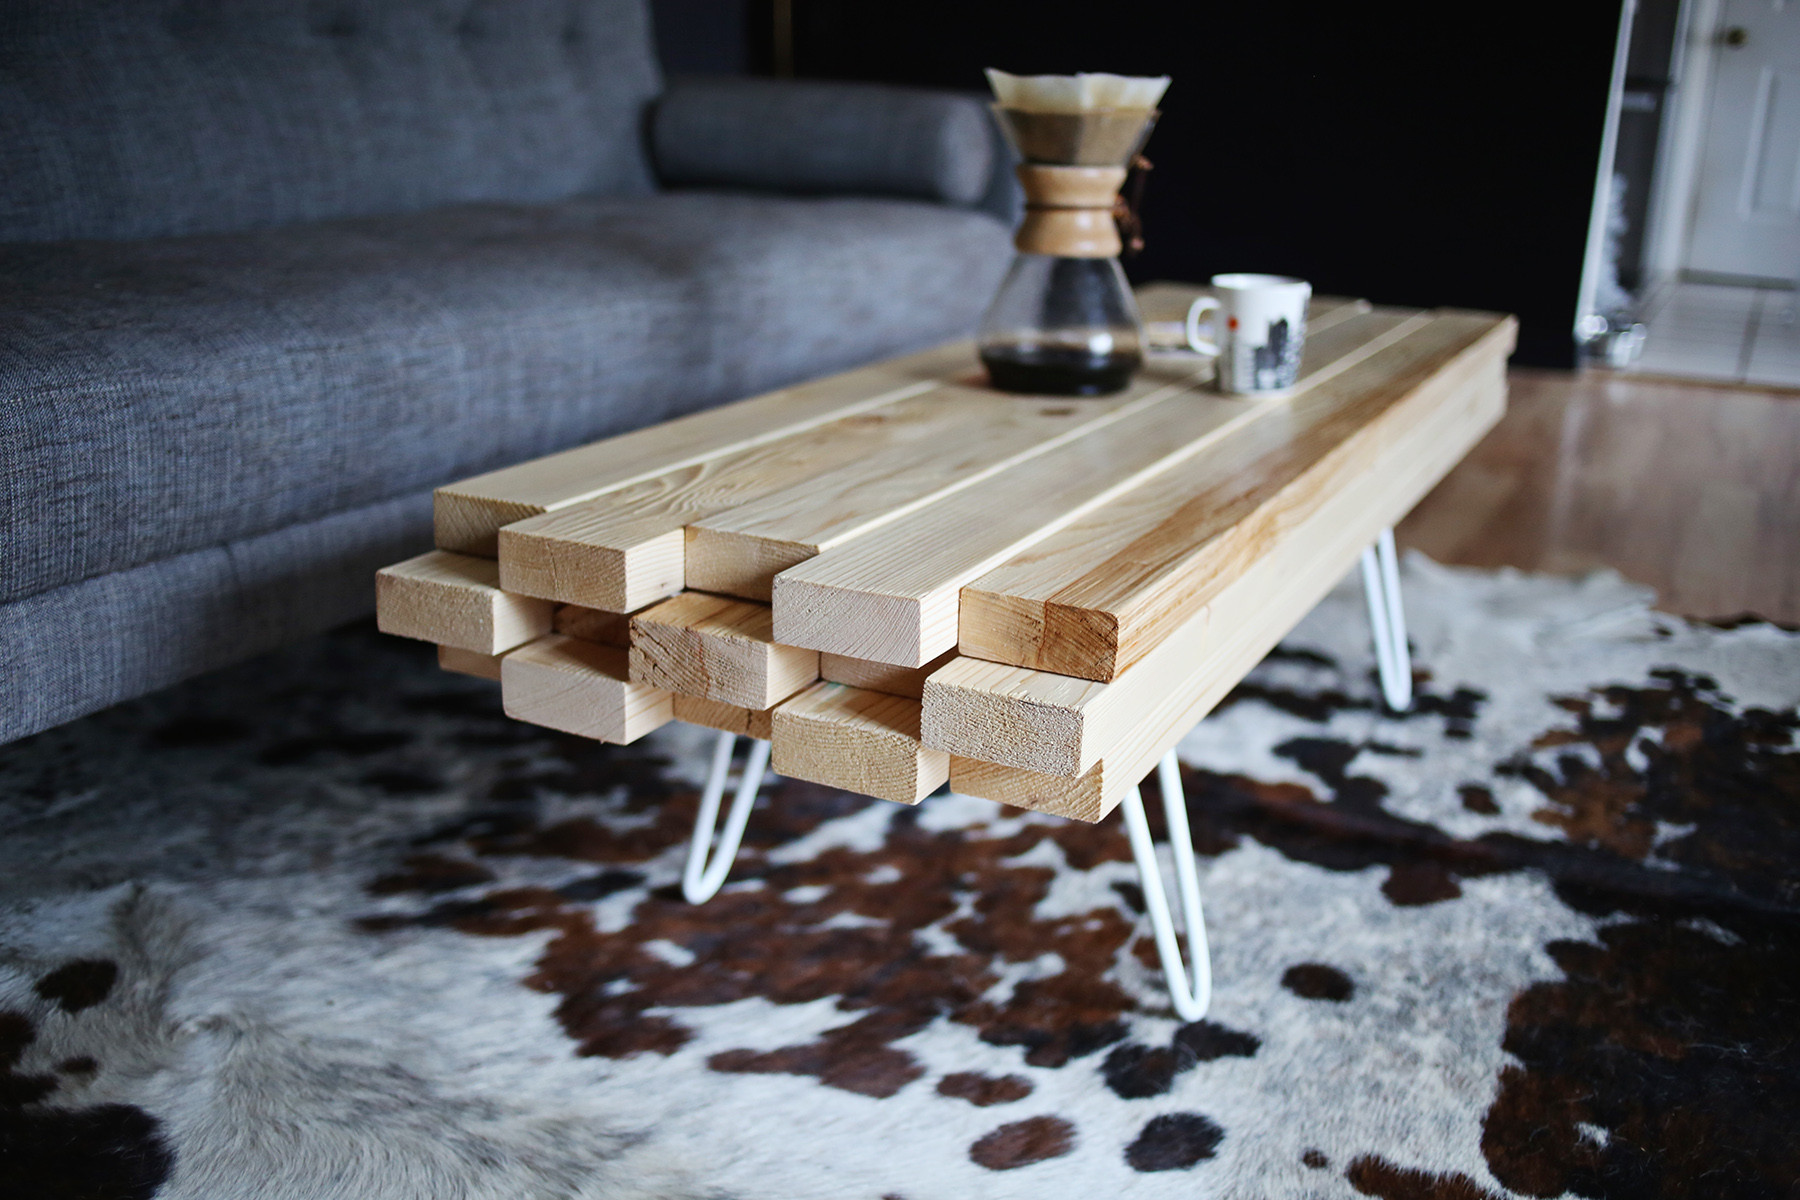 DIY Wood Coffee Tables
 DIY Wooden Coffee Table A Beautiful Mess